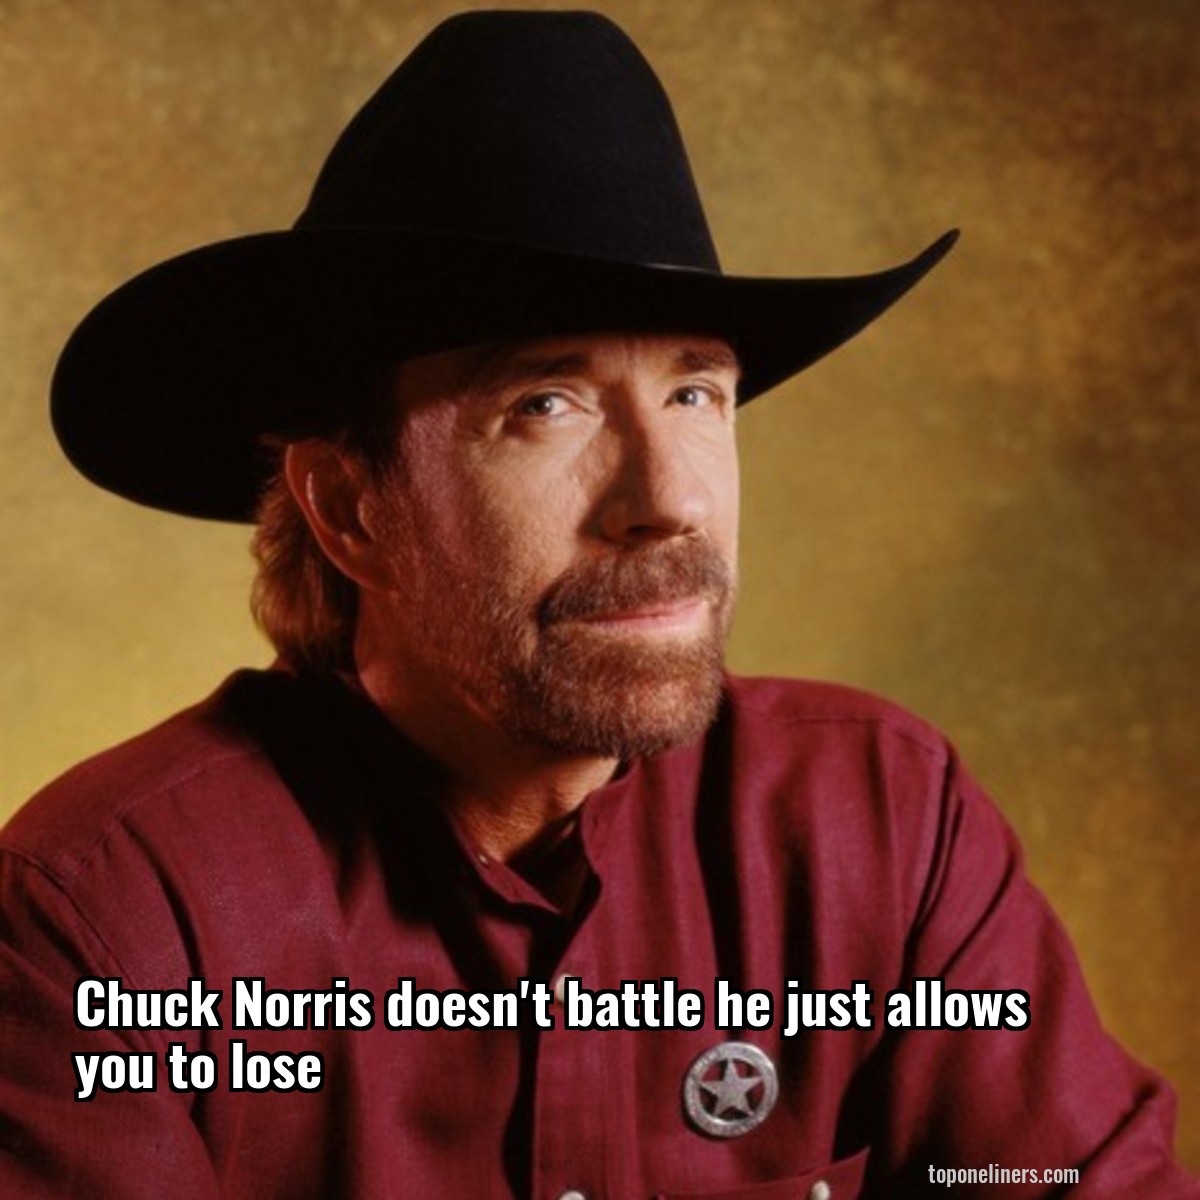 Chuck Norris doesn't battle he just allows you to lose